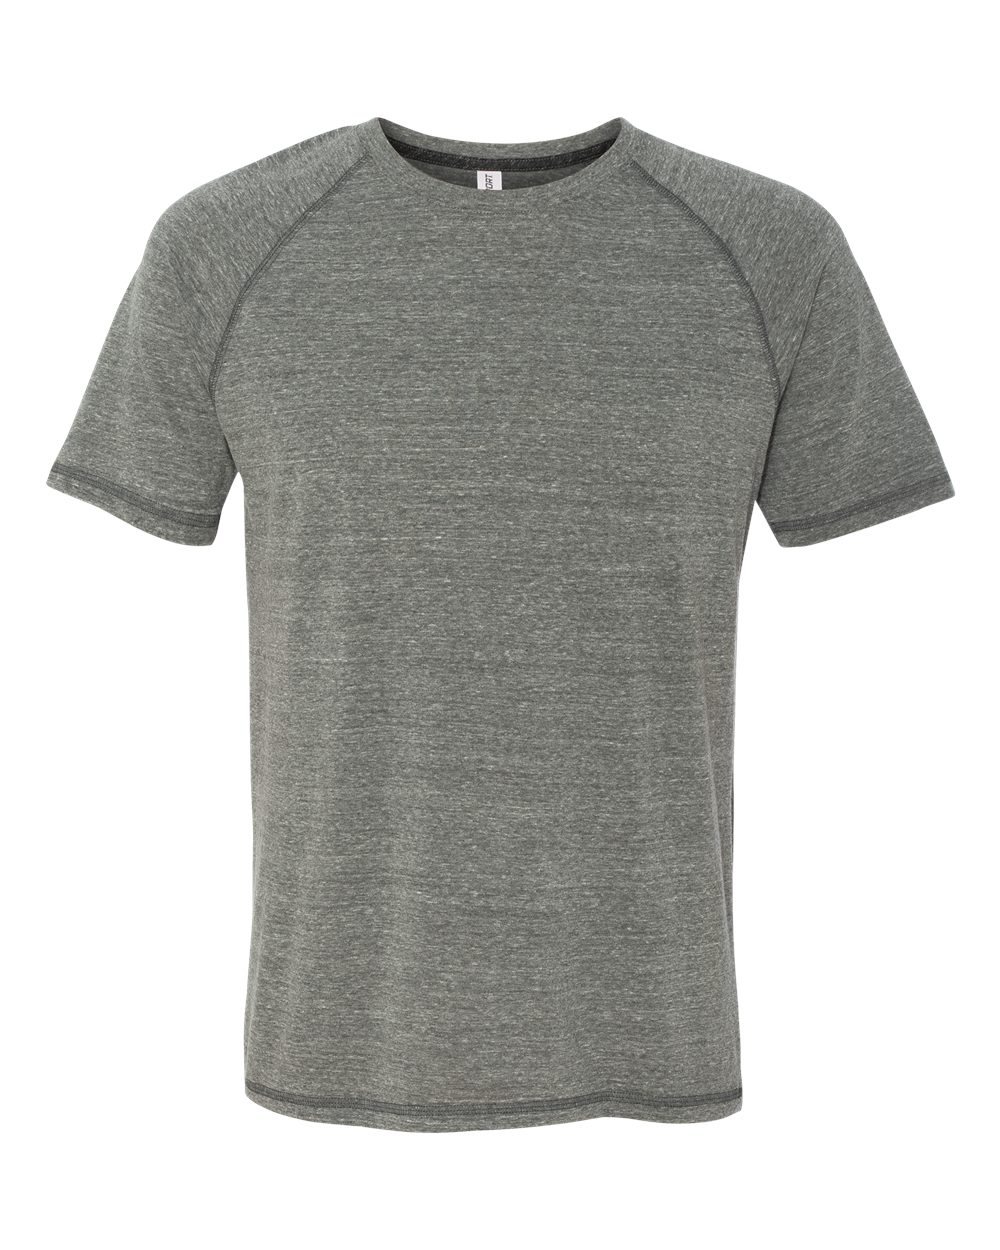 click to view Grey Heather Triblend